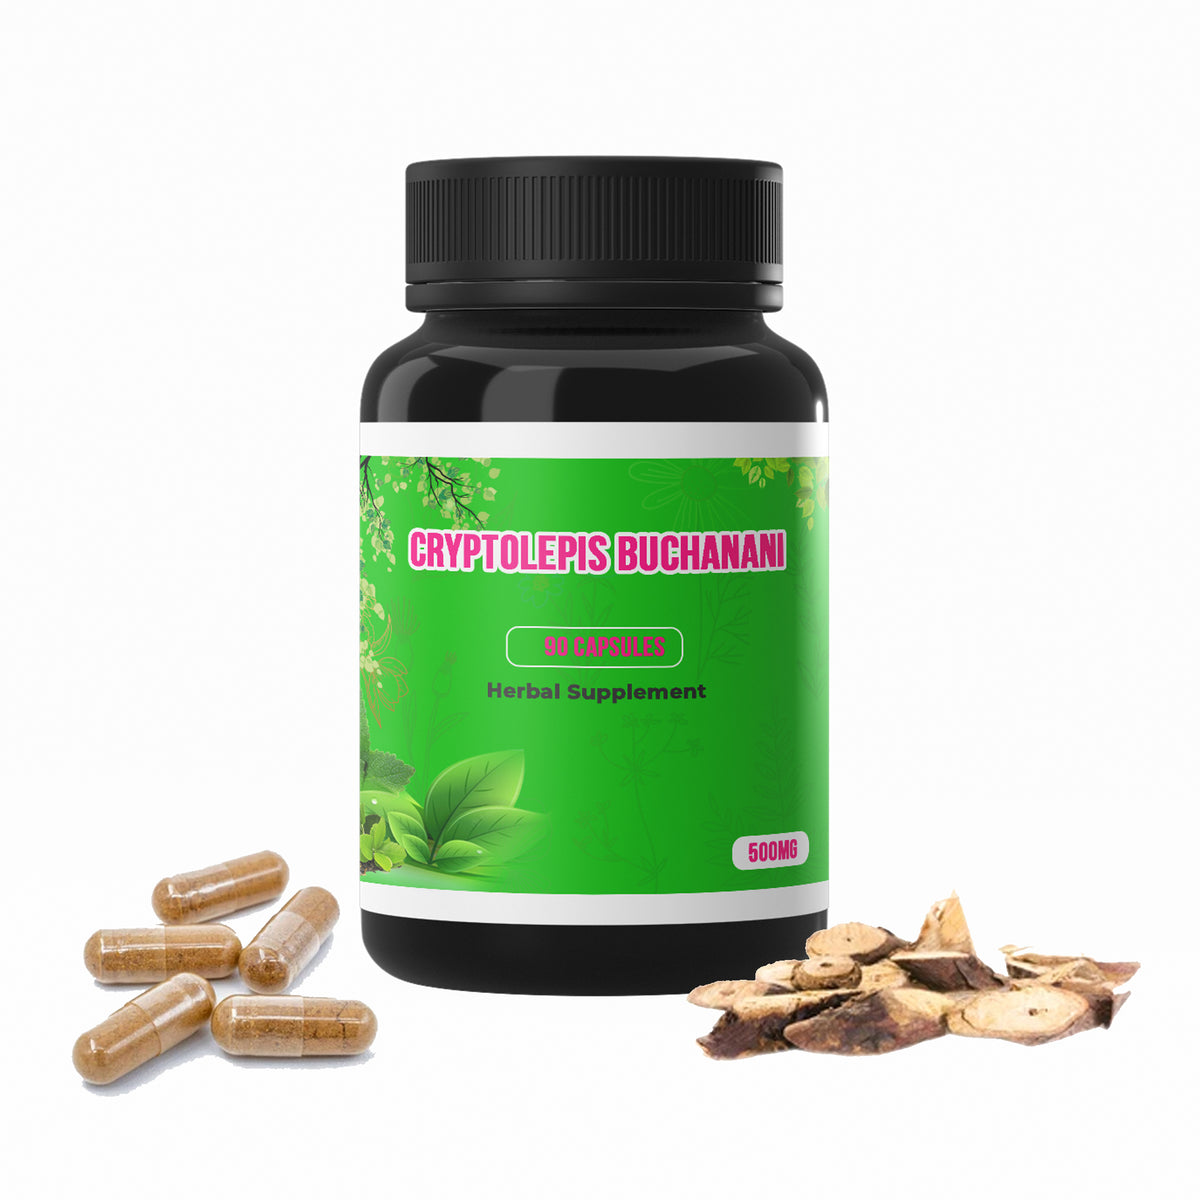 500mg Cryptolepis Buchanani 90 Capsules Aches - Muscle tension - Tendons (softens the deformity & stiffness) Improves arterial blood flow